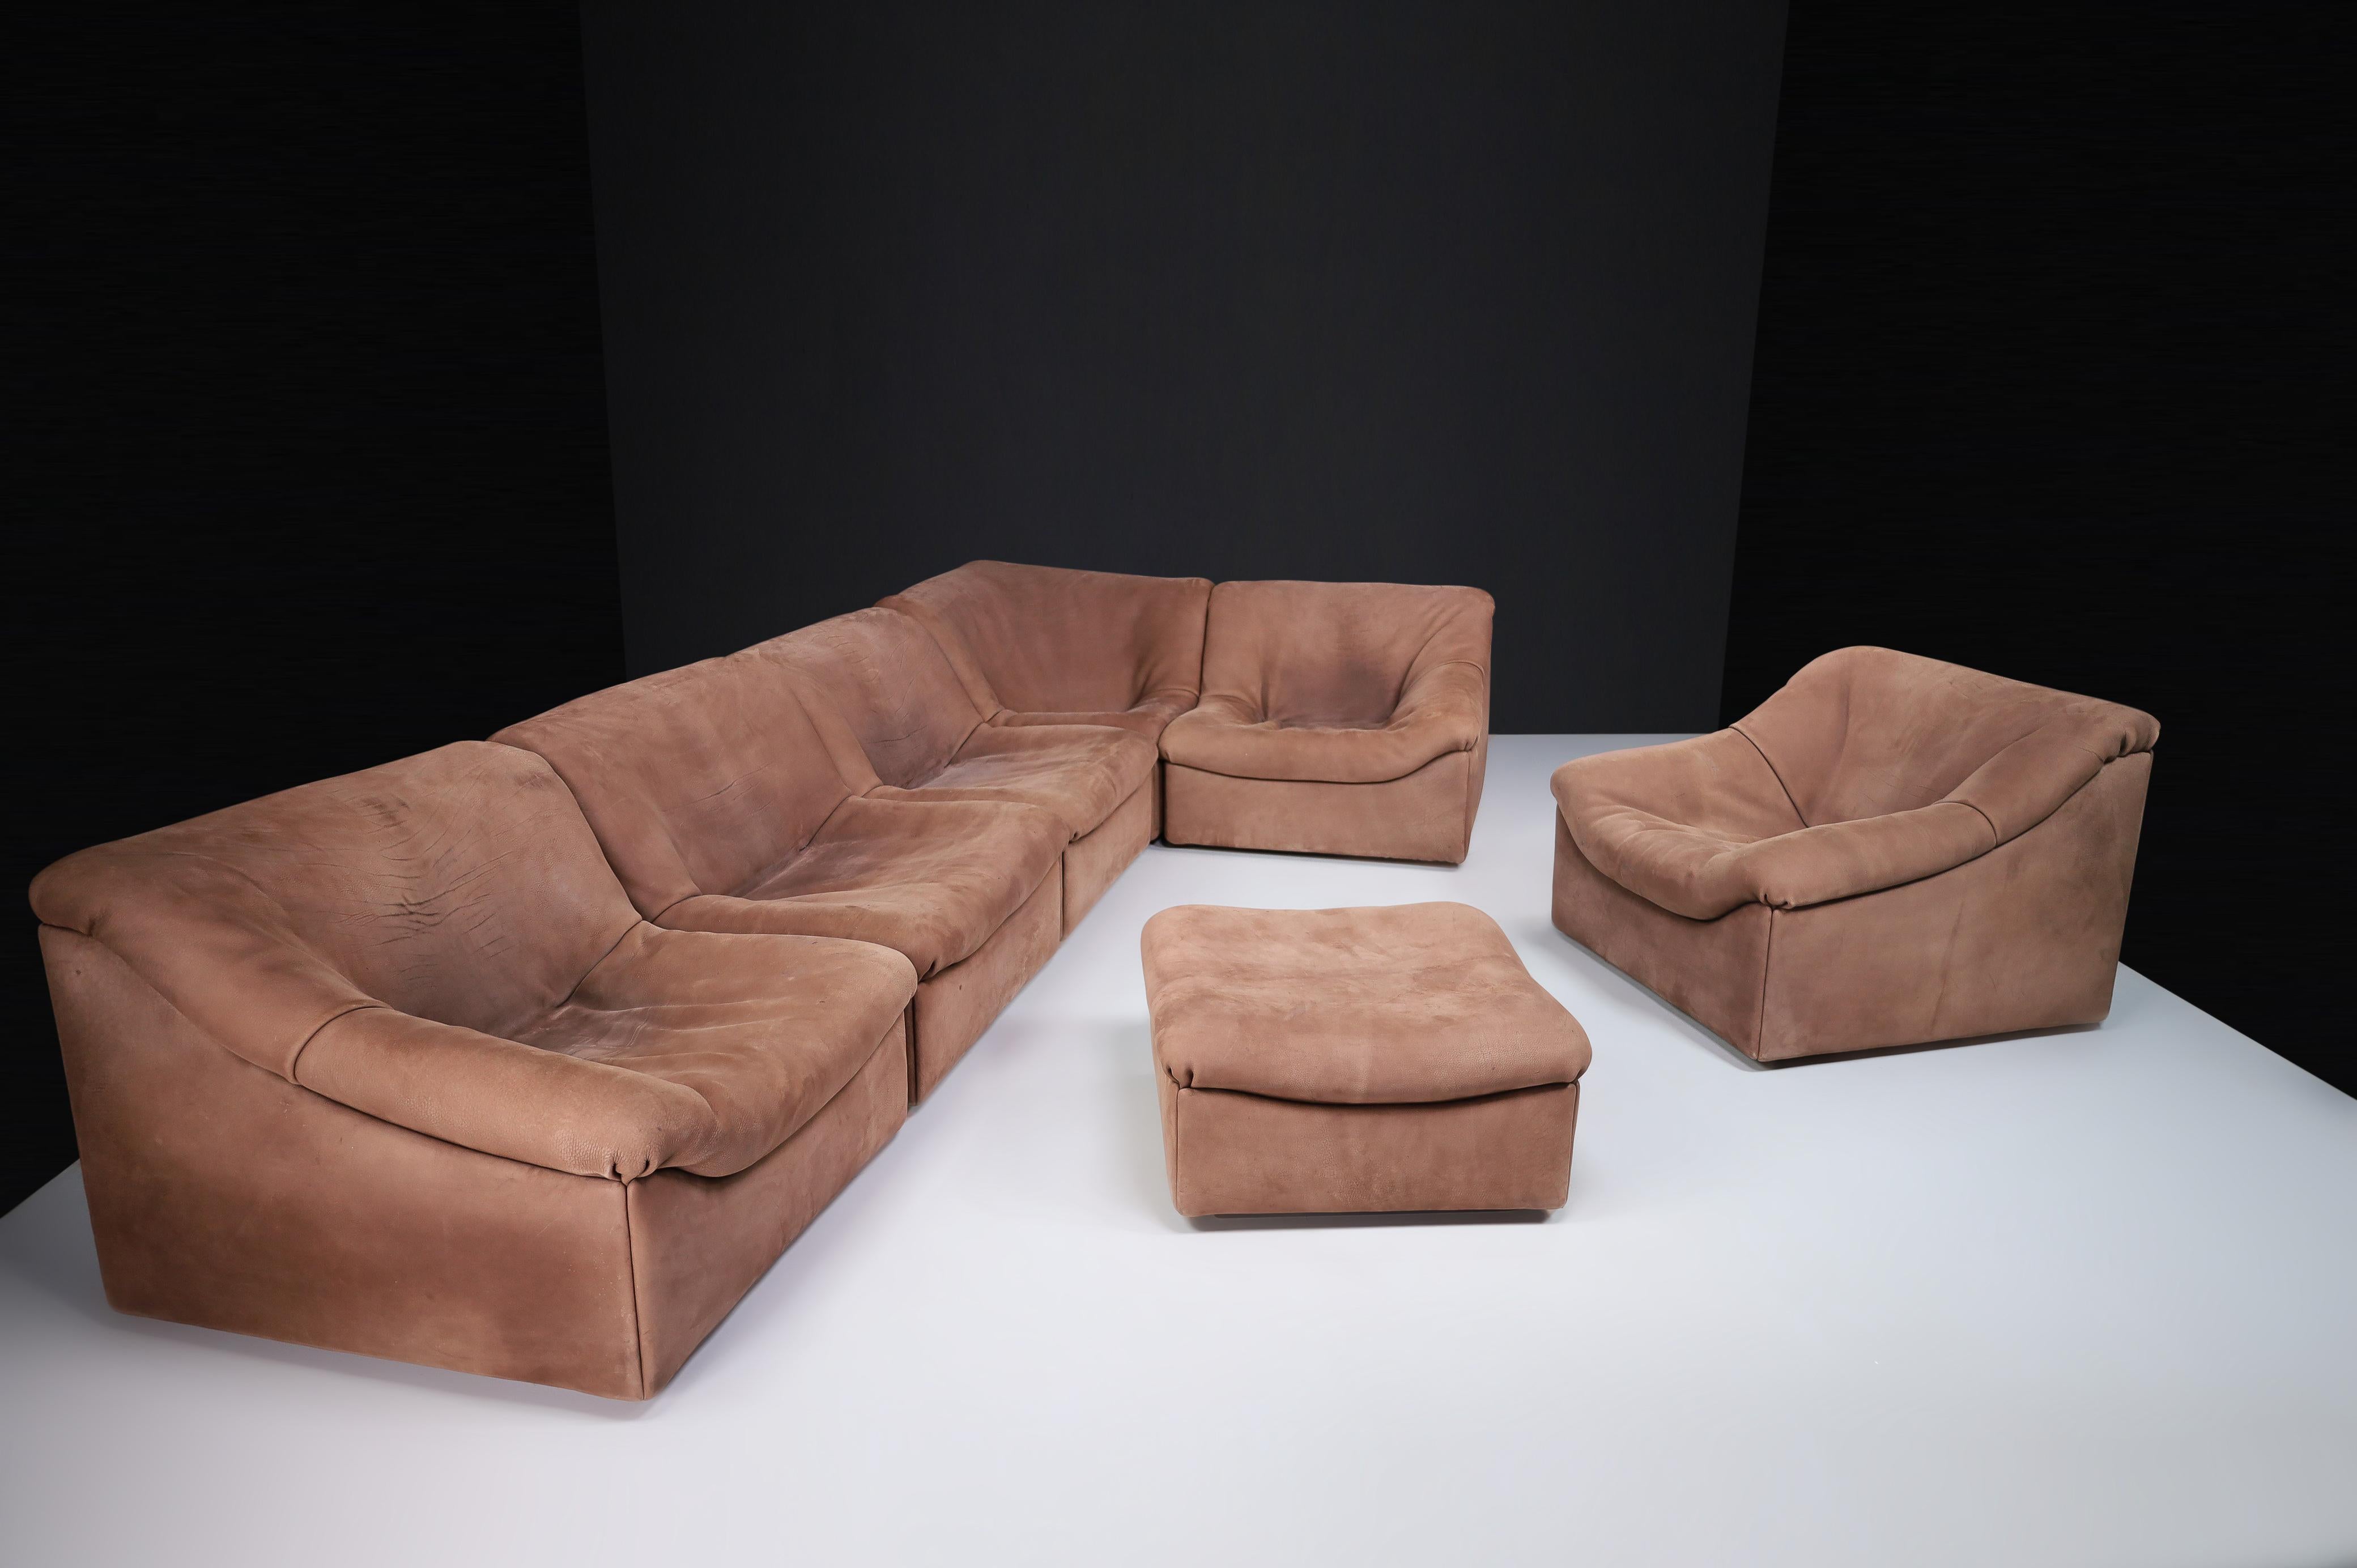 20th Century De Sede DS46 Sectional Sofa-Livingroomset in Buffalo Leather, Switzerland 1970s For Sale